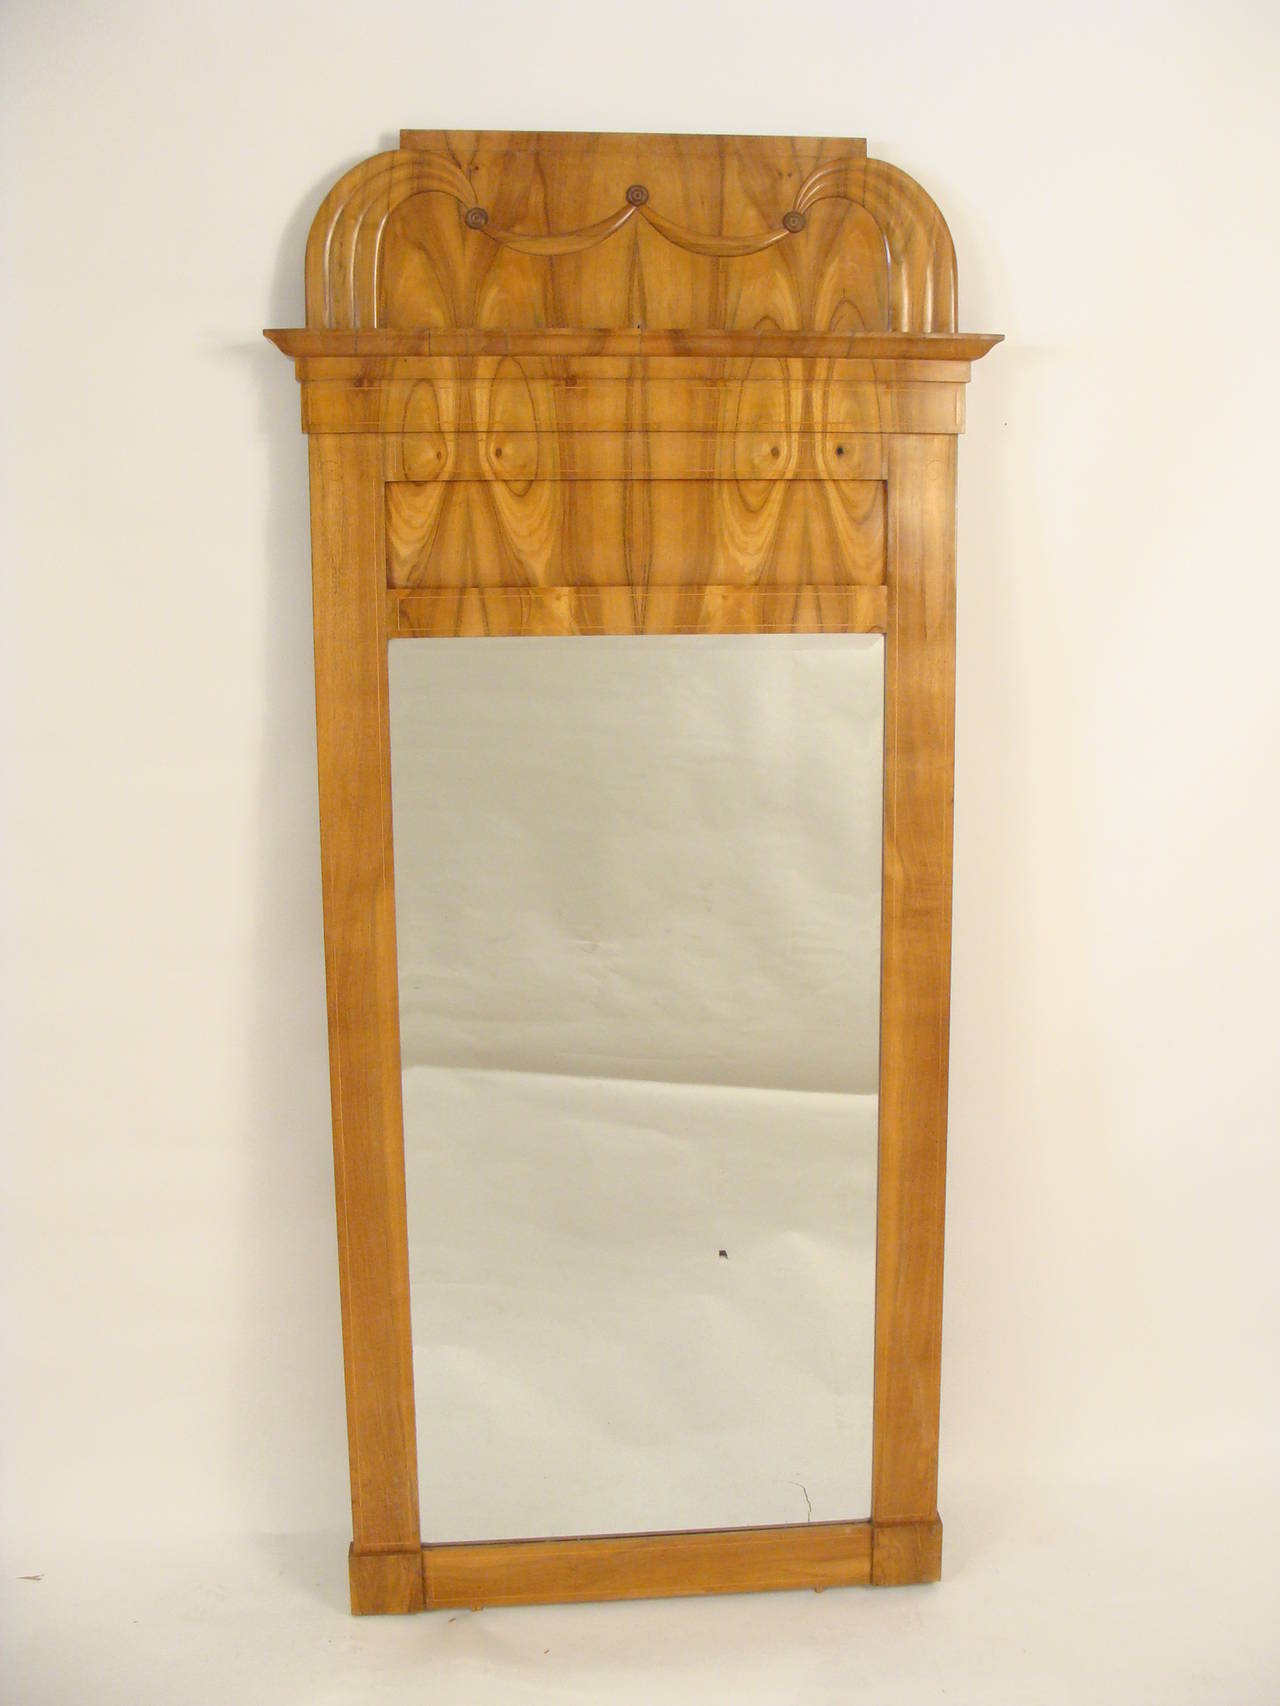 Biedermeier revival console and mirror, circa 1920. The wood is a nice burled wood, I am not 100% certain what the wood is, it looks like burled walnut.